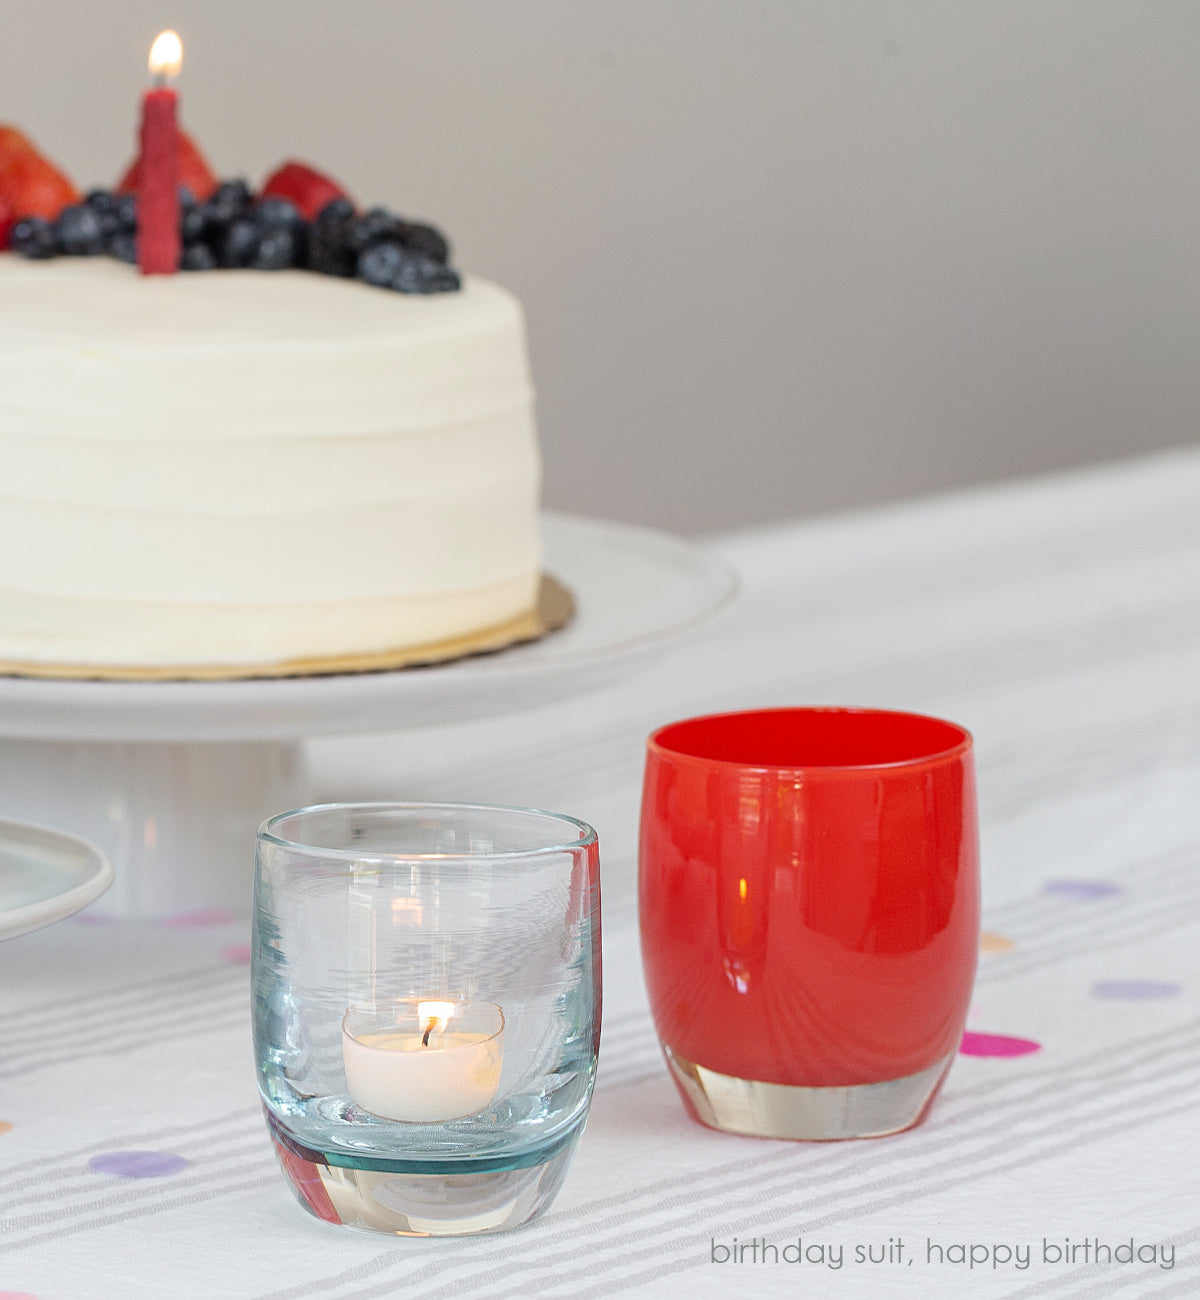 happy birthday bright red, hand-blown glass votive candle holder. Paired with birthday suit